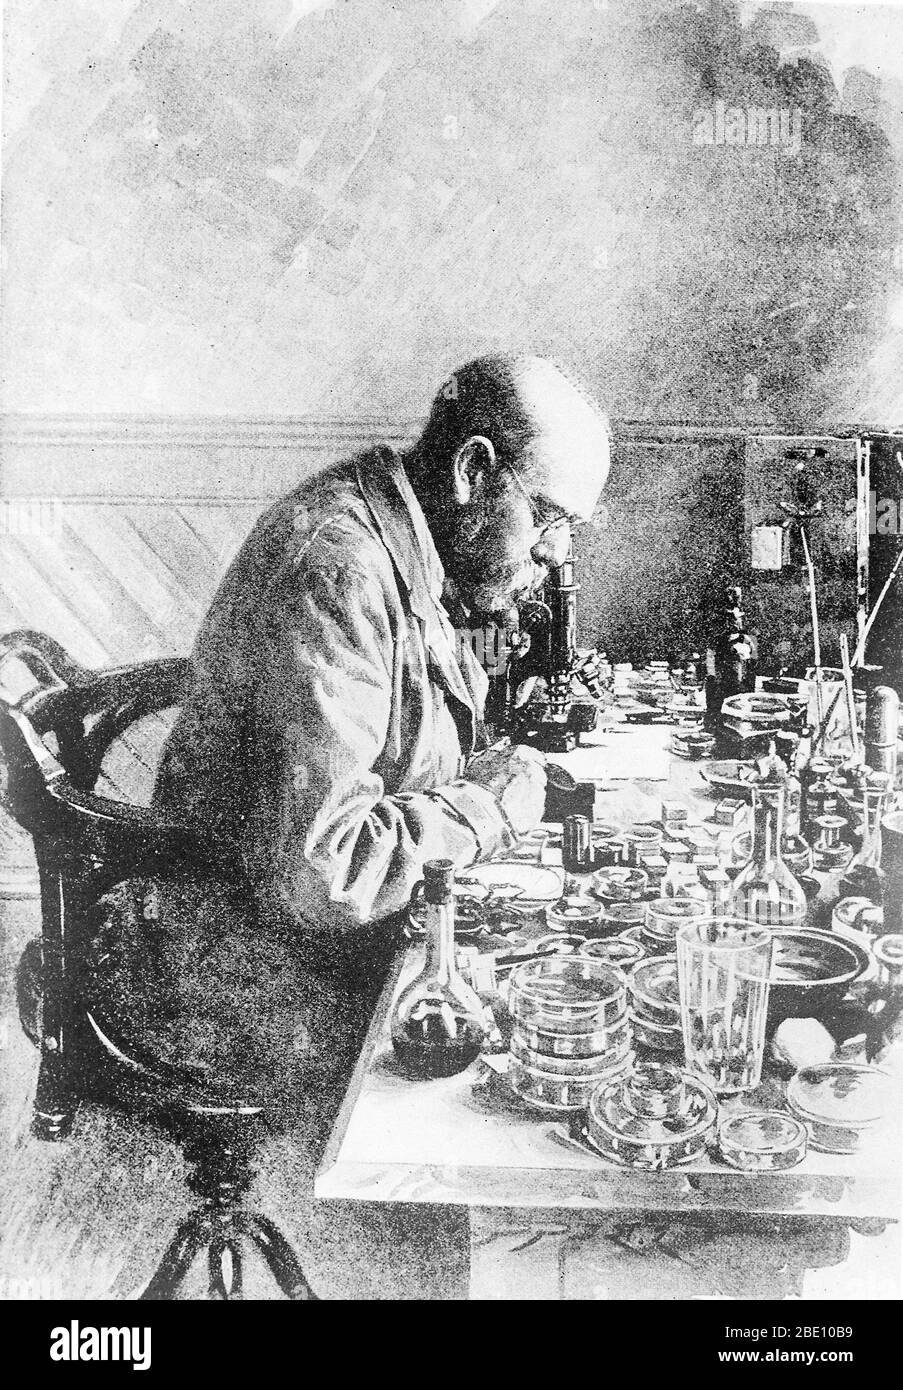 Heinrich Hermann Robert Koch (December 11, 1843 - May 27, 1910) was a German physician and microbiologist. As the founder of modern bacteriology, he identified the causative agents of tuberculosis, cholera, and anthrax and gave experimental support for the concept of infectious disease, which included experiments on humans and animals. Koch created and improved laboratory technologies and techniques, and made key discoveries in public health. For his research on tuberculosis, Koch received the Nobel Prize in Physiology or Medicine in 1905. In 1910, Koch suffered a heart attack and never made a Stock Photo